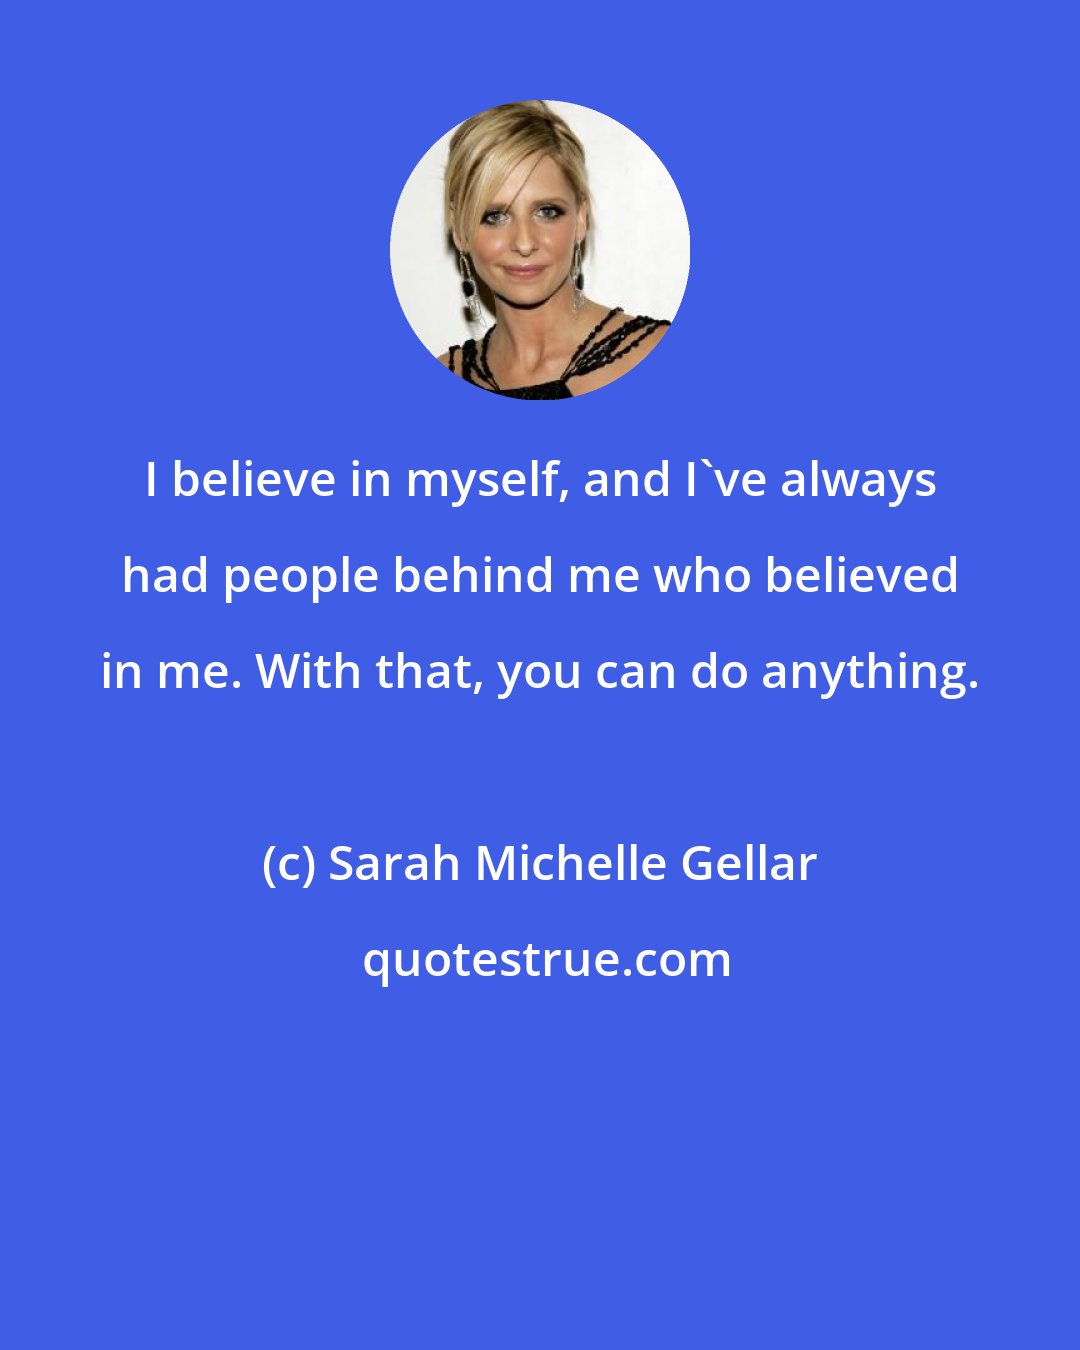 Sarah Michelle Gellar: I believe in myself, and I've always had people behind me who believed in me. With that, you can do anything.